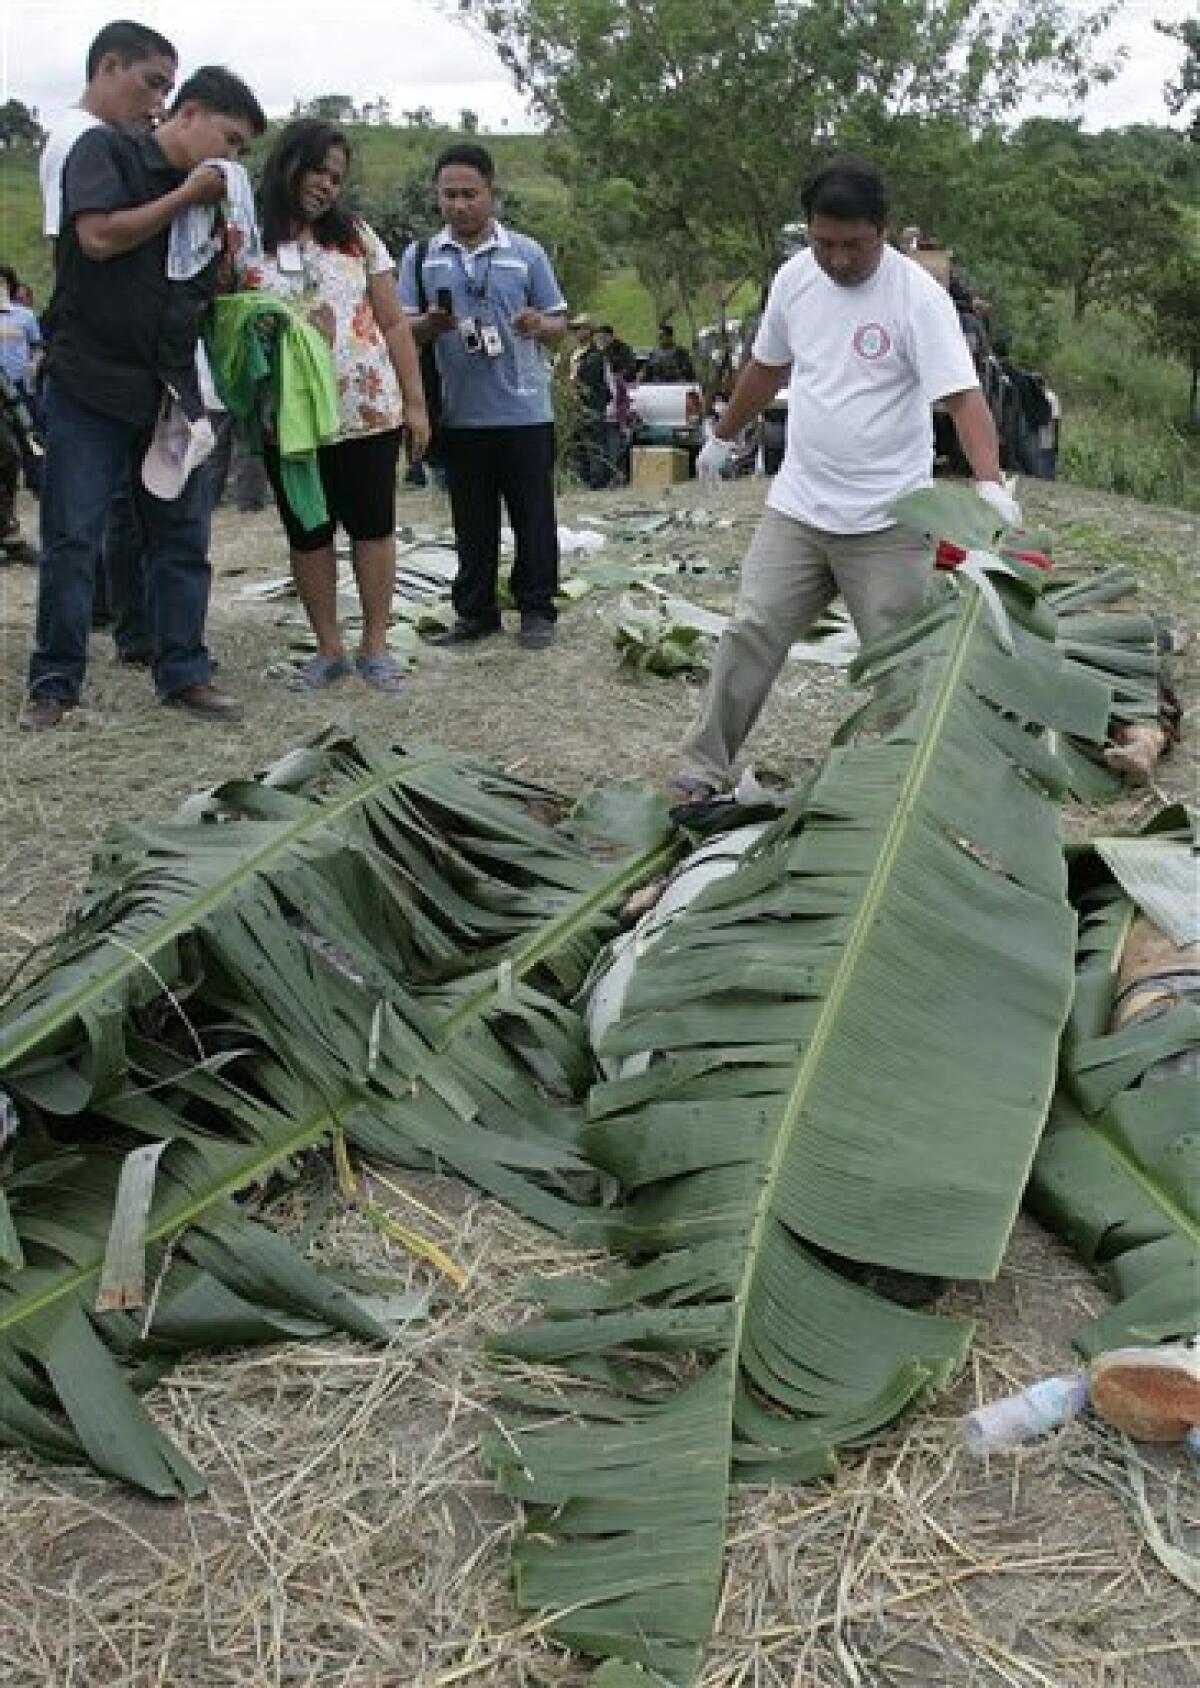 Members of the media try to identify their colleagues who were dumped together with three vehicles along a hillside grave in Ampatuan, Maguindanao province, southern Philippines on Wednesday Nov. 25, 2009. Philippine authorities, under intense public pressure to make arrests in the country's worst election massacre, said Wednesday they are investigating a member of a powerful clan allied with the government along with four police commanders. (AP Photo/Aaron Favila)